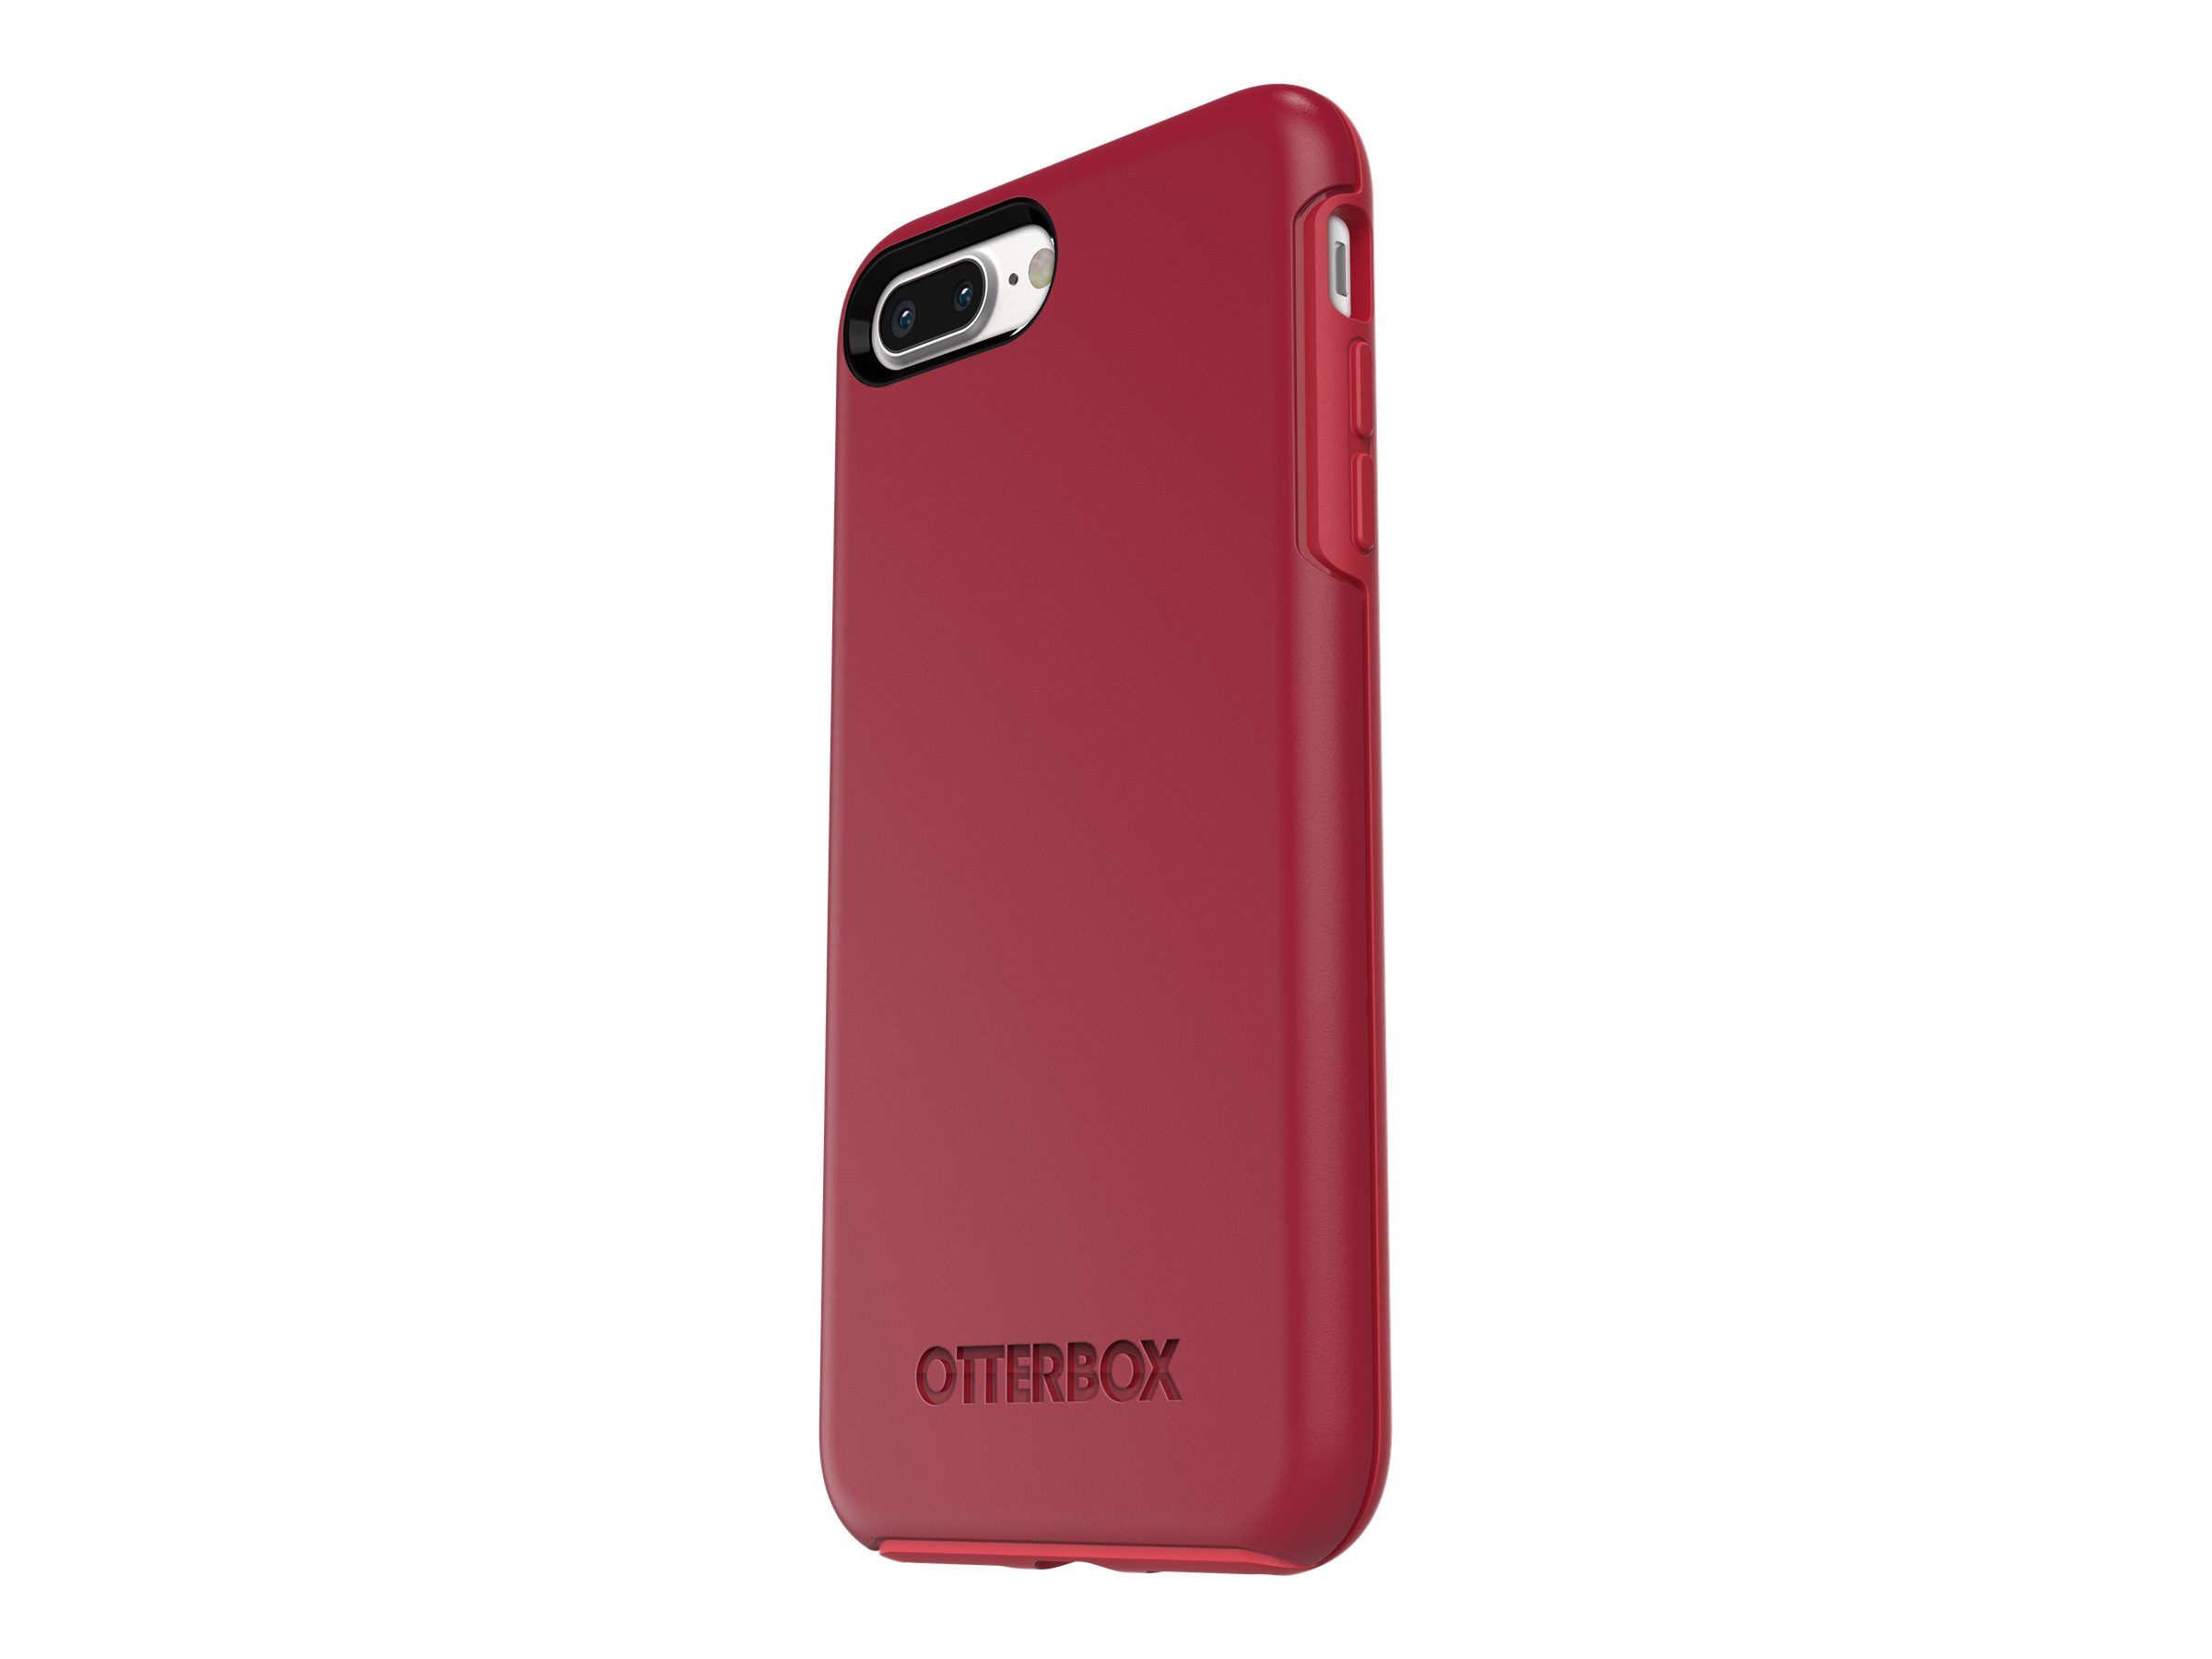 OtterBox Symmetry Series Case for Apple iPhone 7 Plus, Rosso Corsa - image 4 of 8